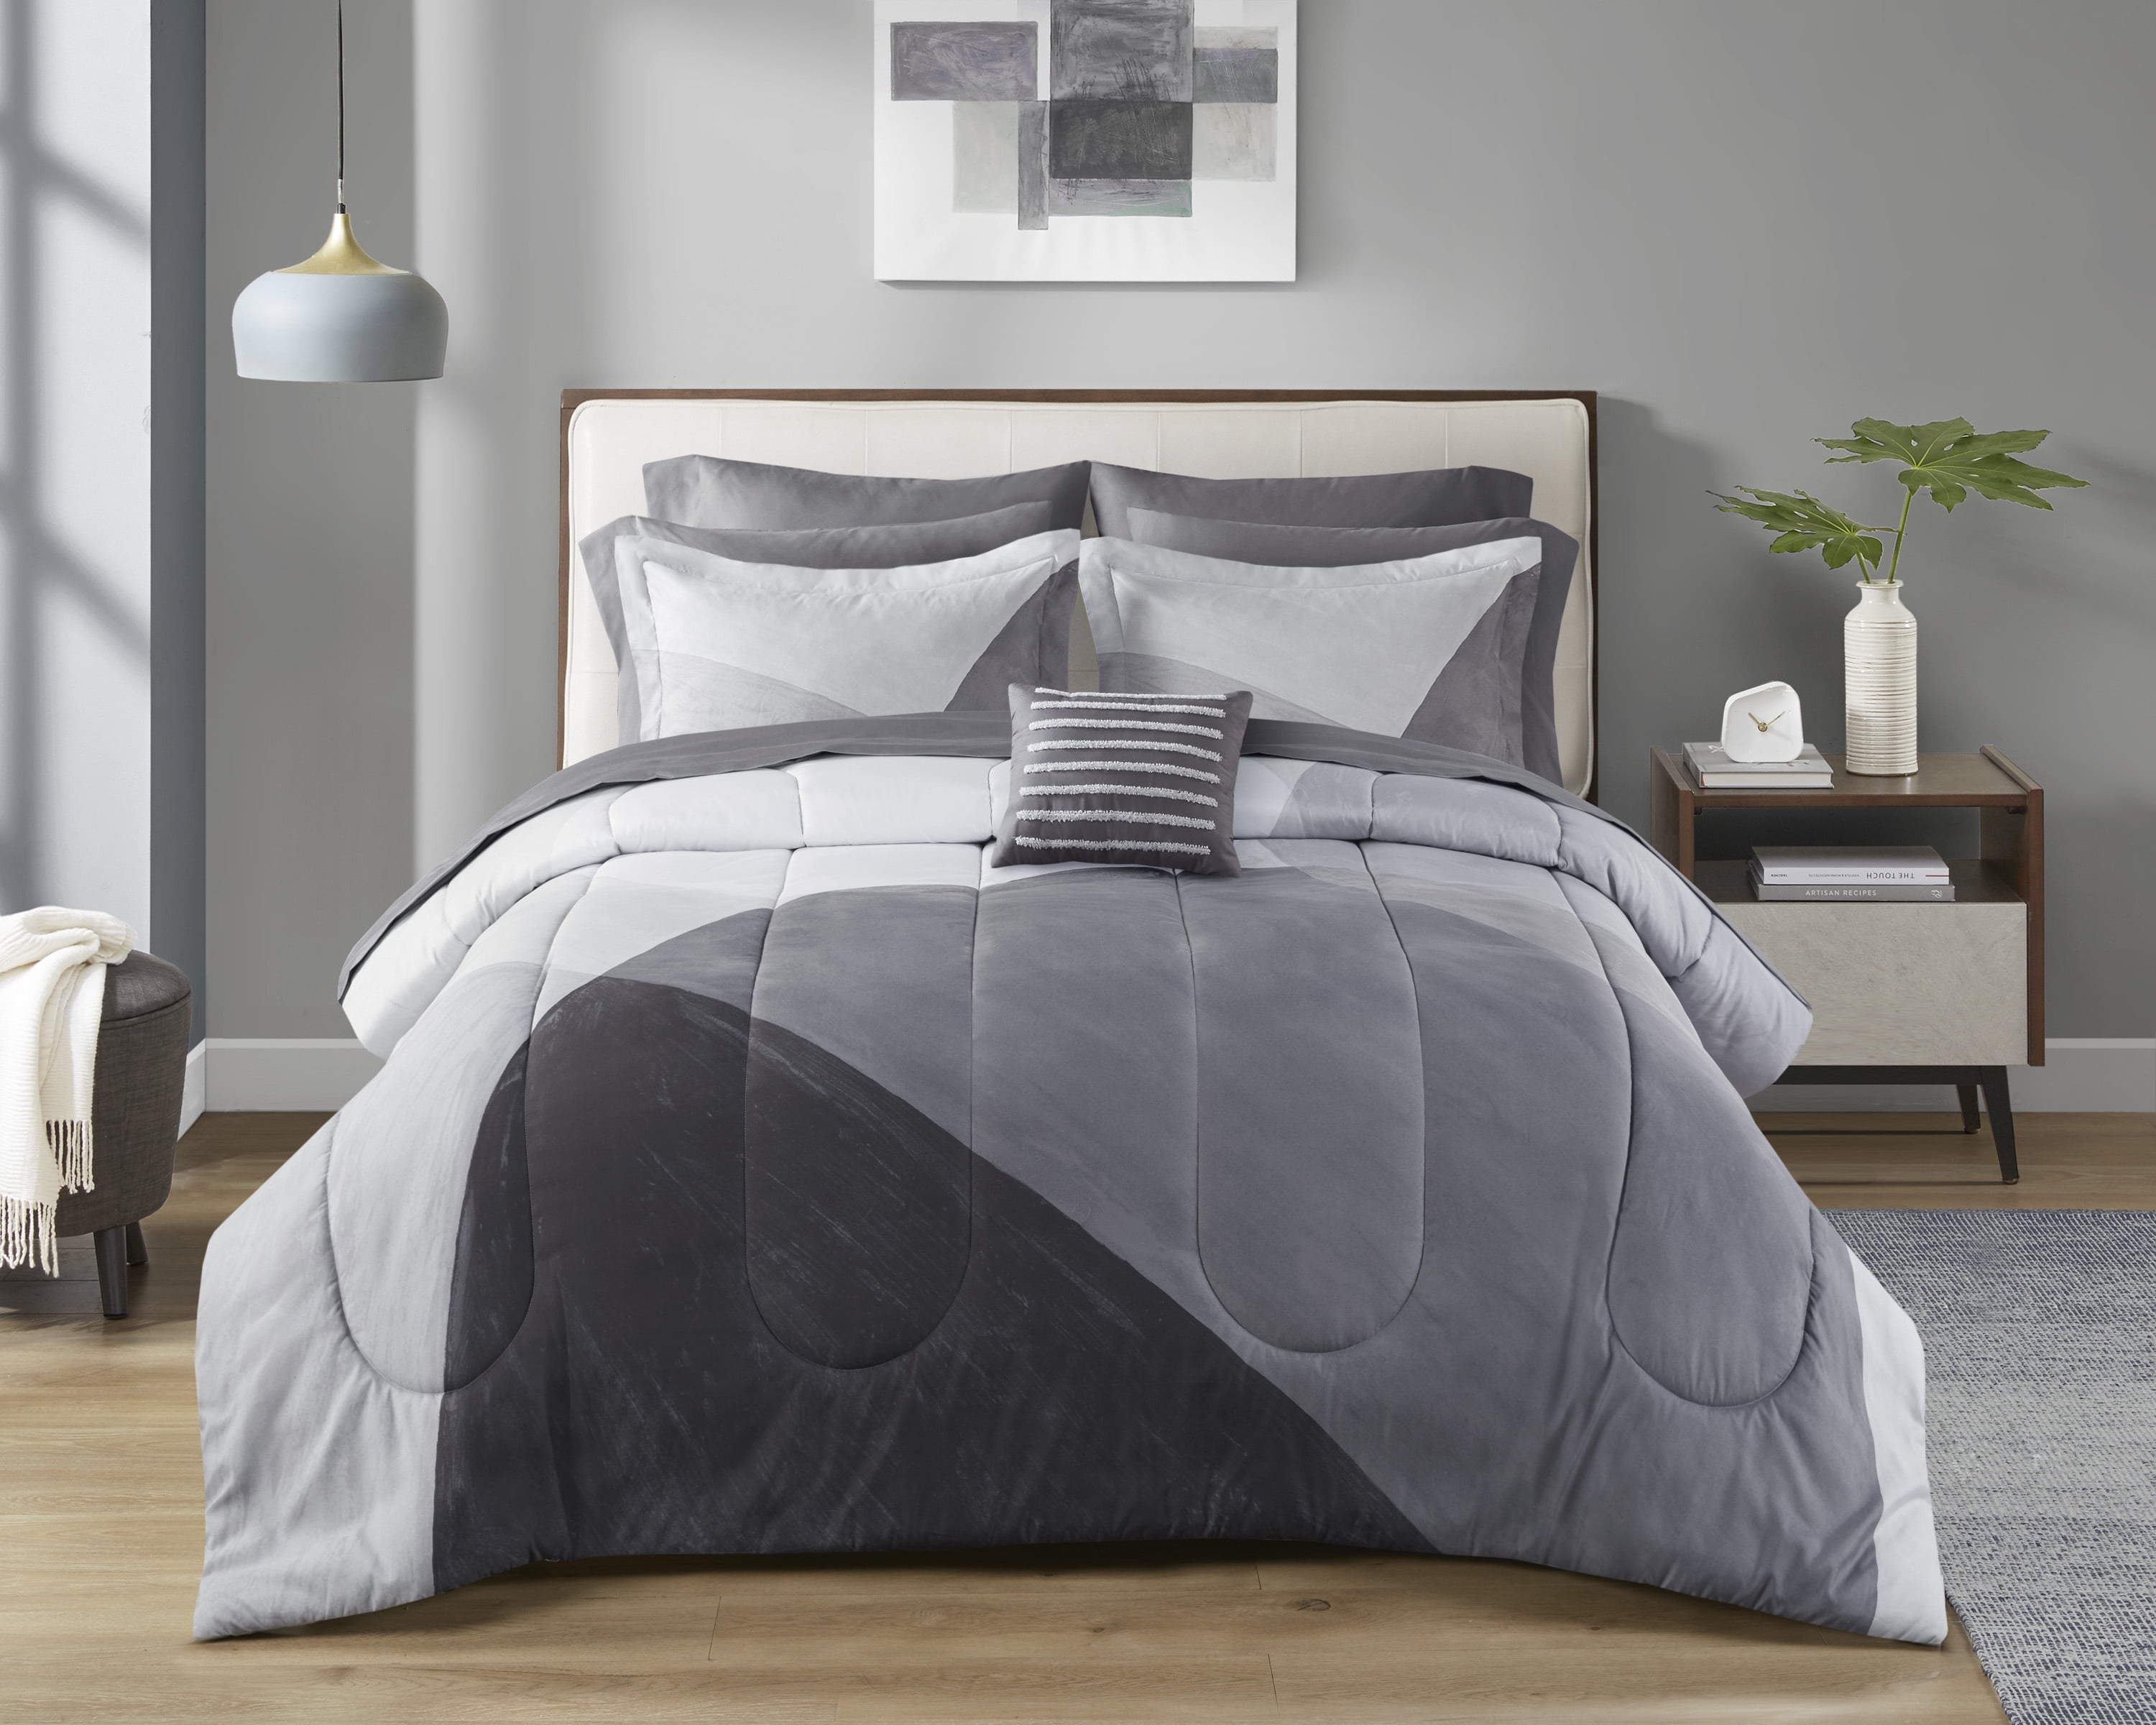 Mainstays Grey 10 Piece Bed in a Bag Comforter Set With Sheets, Queen 